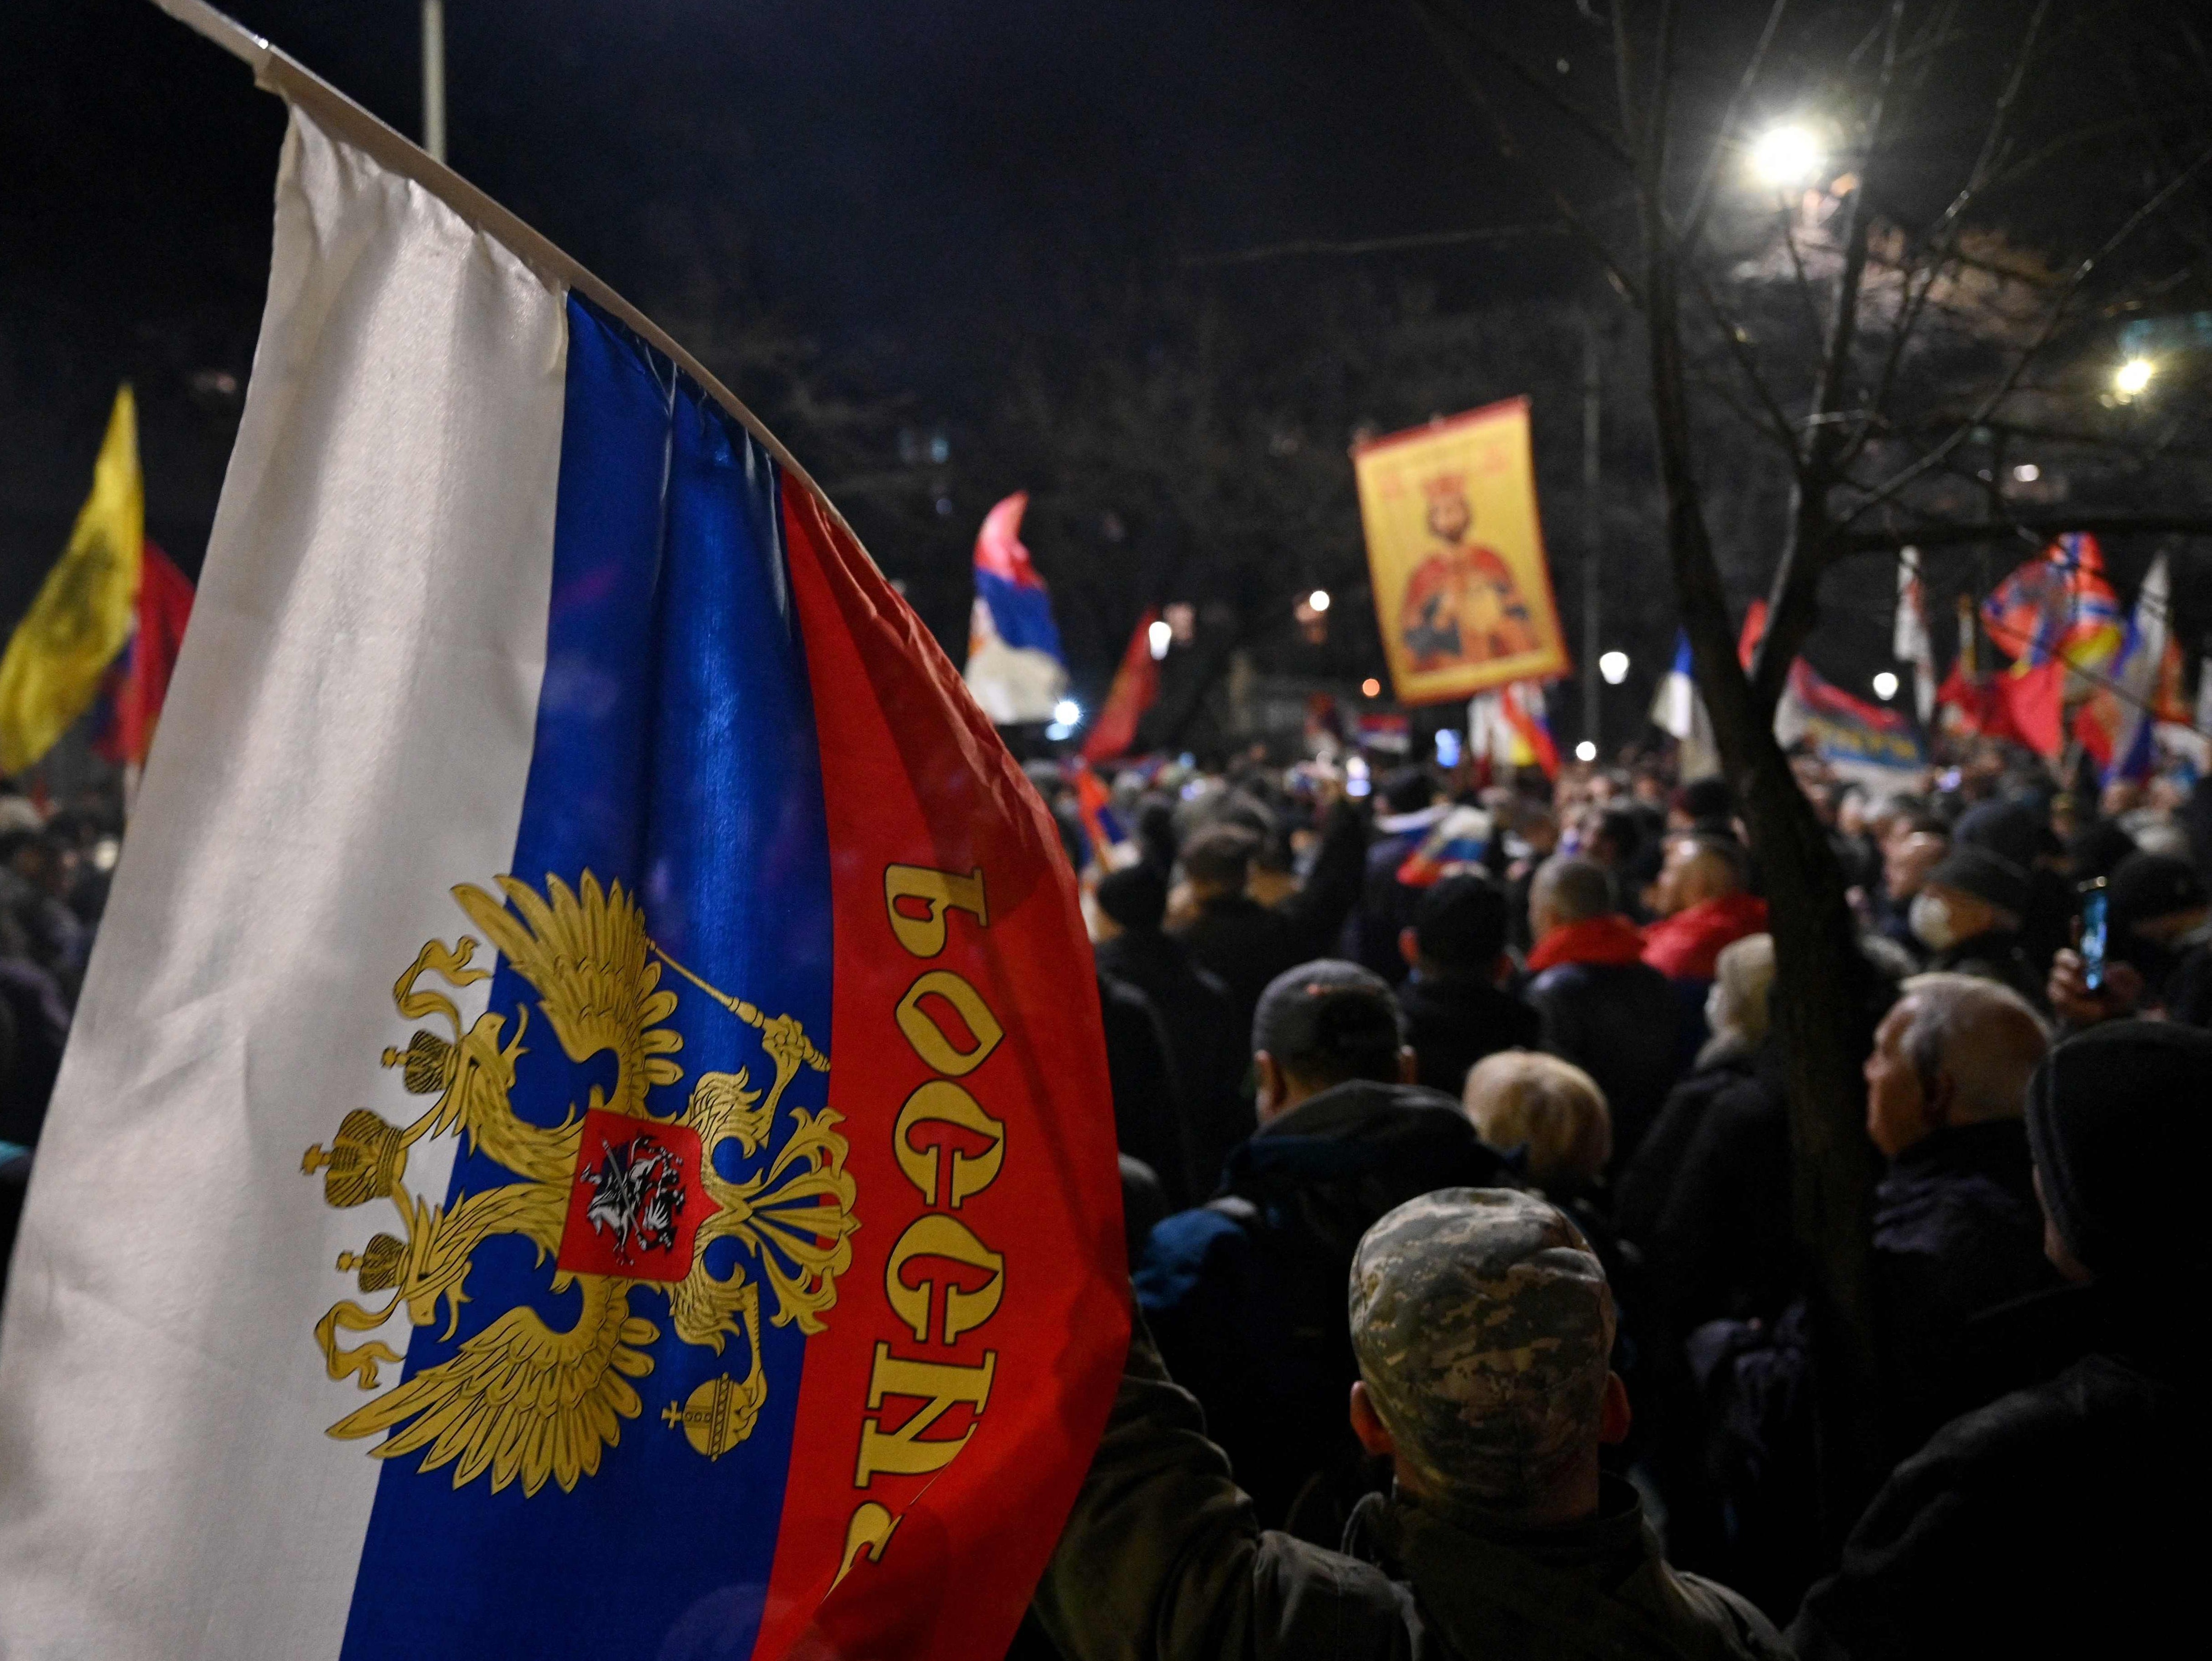 People wave Russian and Serbian flags during a rally organised by Serbian right-wing organisations in support of Russian invasion in Ukraine, in Belgrade earlier this month